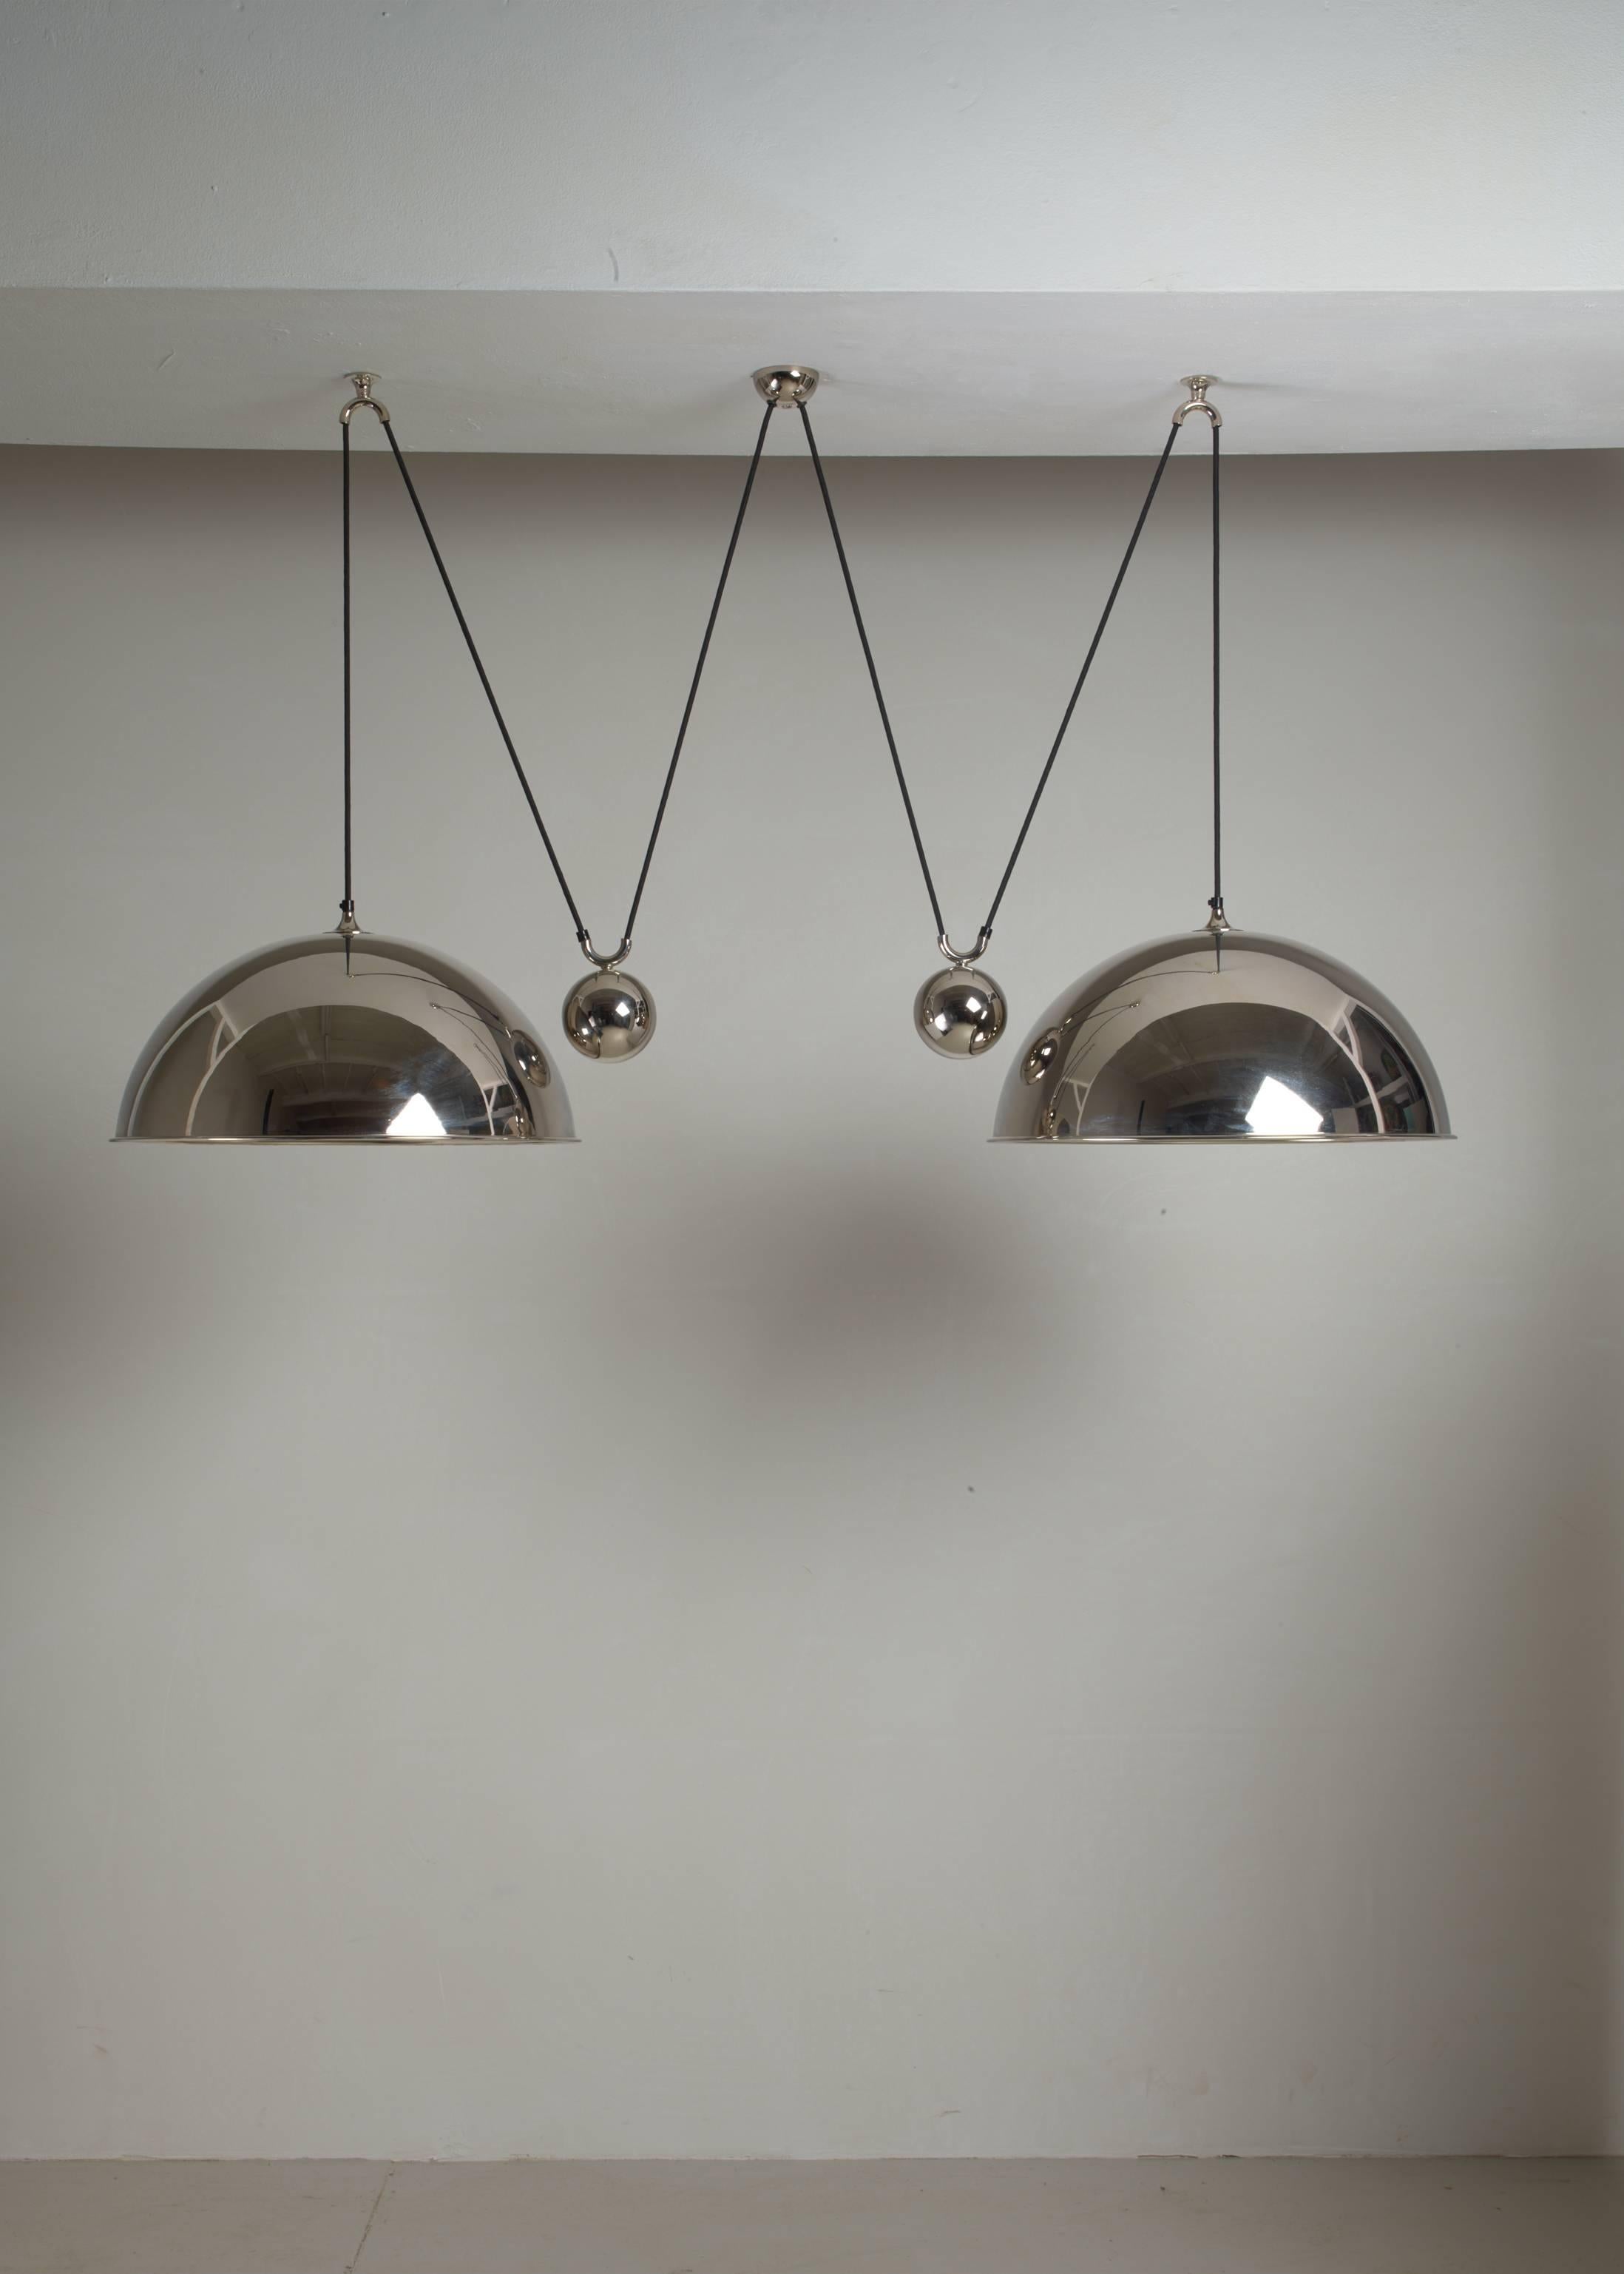 A Florian Schulz double 'Posa' pendant lamp with two shades and two counterweights. The lamps are made of nickel-plated brass.
The measurements stated are of one shade.

 